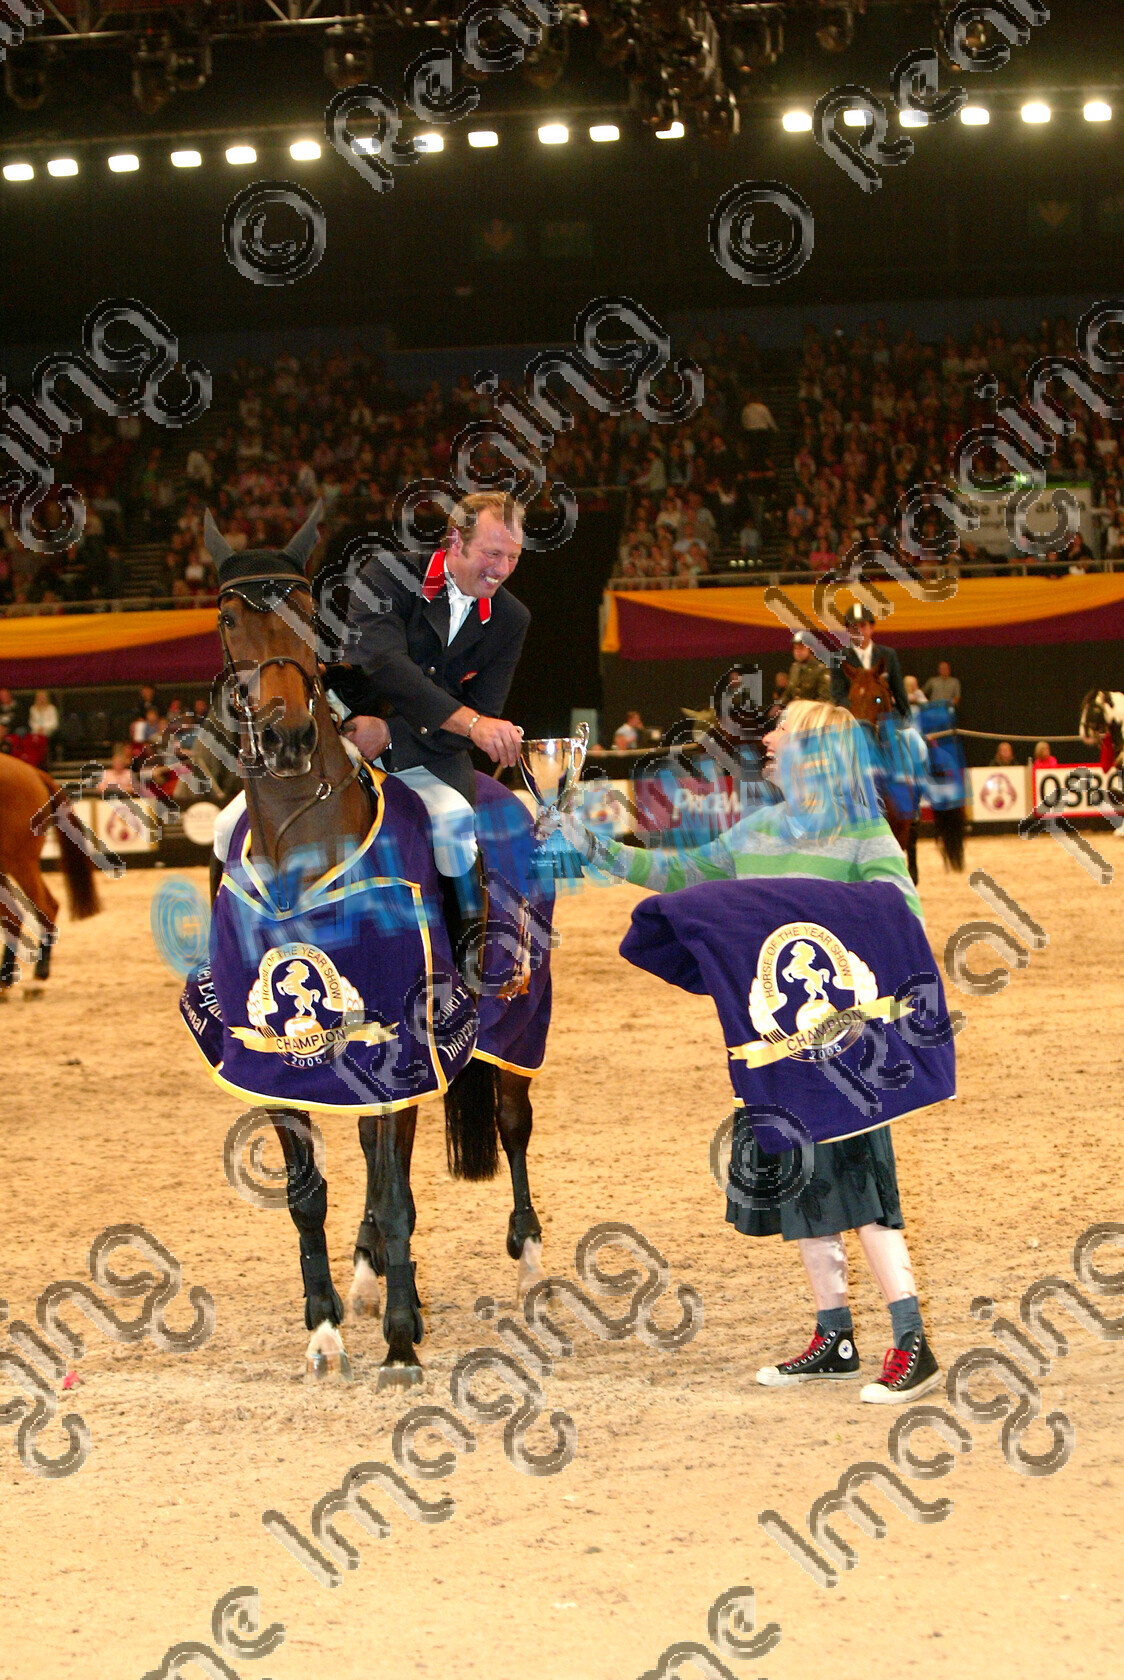 S05-67-T5-037 
 HOYS 2005: The Xerox Special Event Services Cup winner 
 Keywords: horse of the year show 2005 05 hoys saturday 15 10 october 20 Xerox Special Event Services Cup winner 9 Marleen Geoff Luckett bay mare standing presentation rug trophy rosette showjumping showjumper